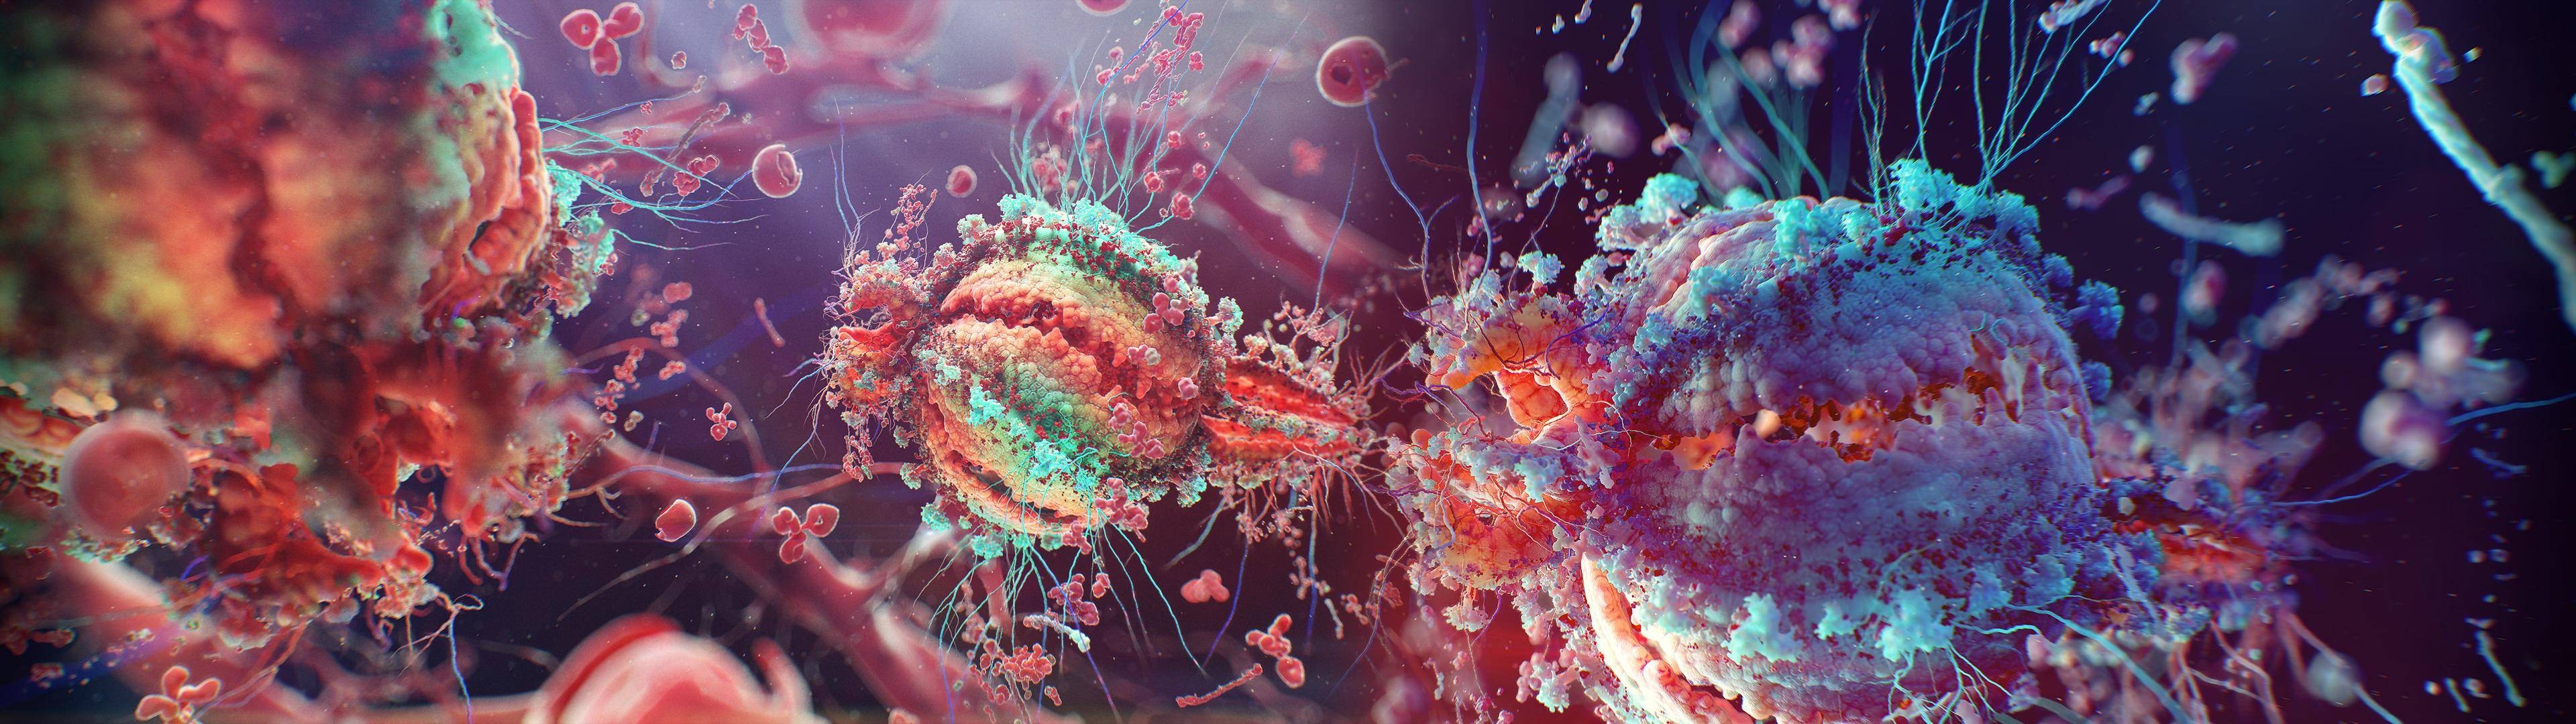 Nature Biology Microscopic 3D Science 3840x1080